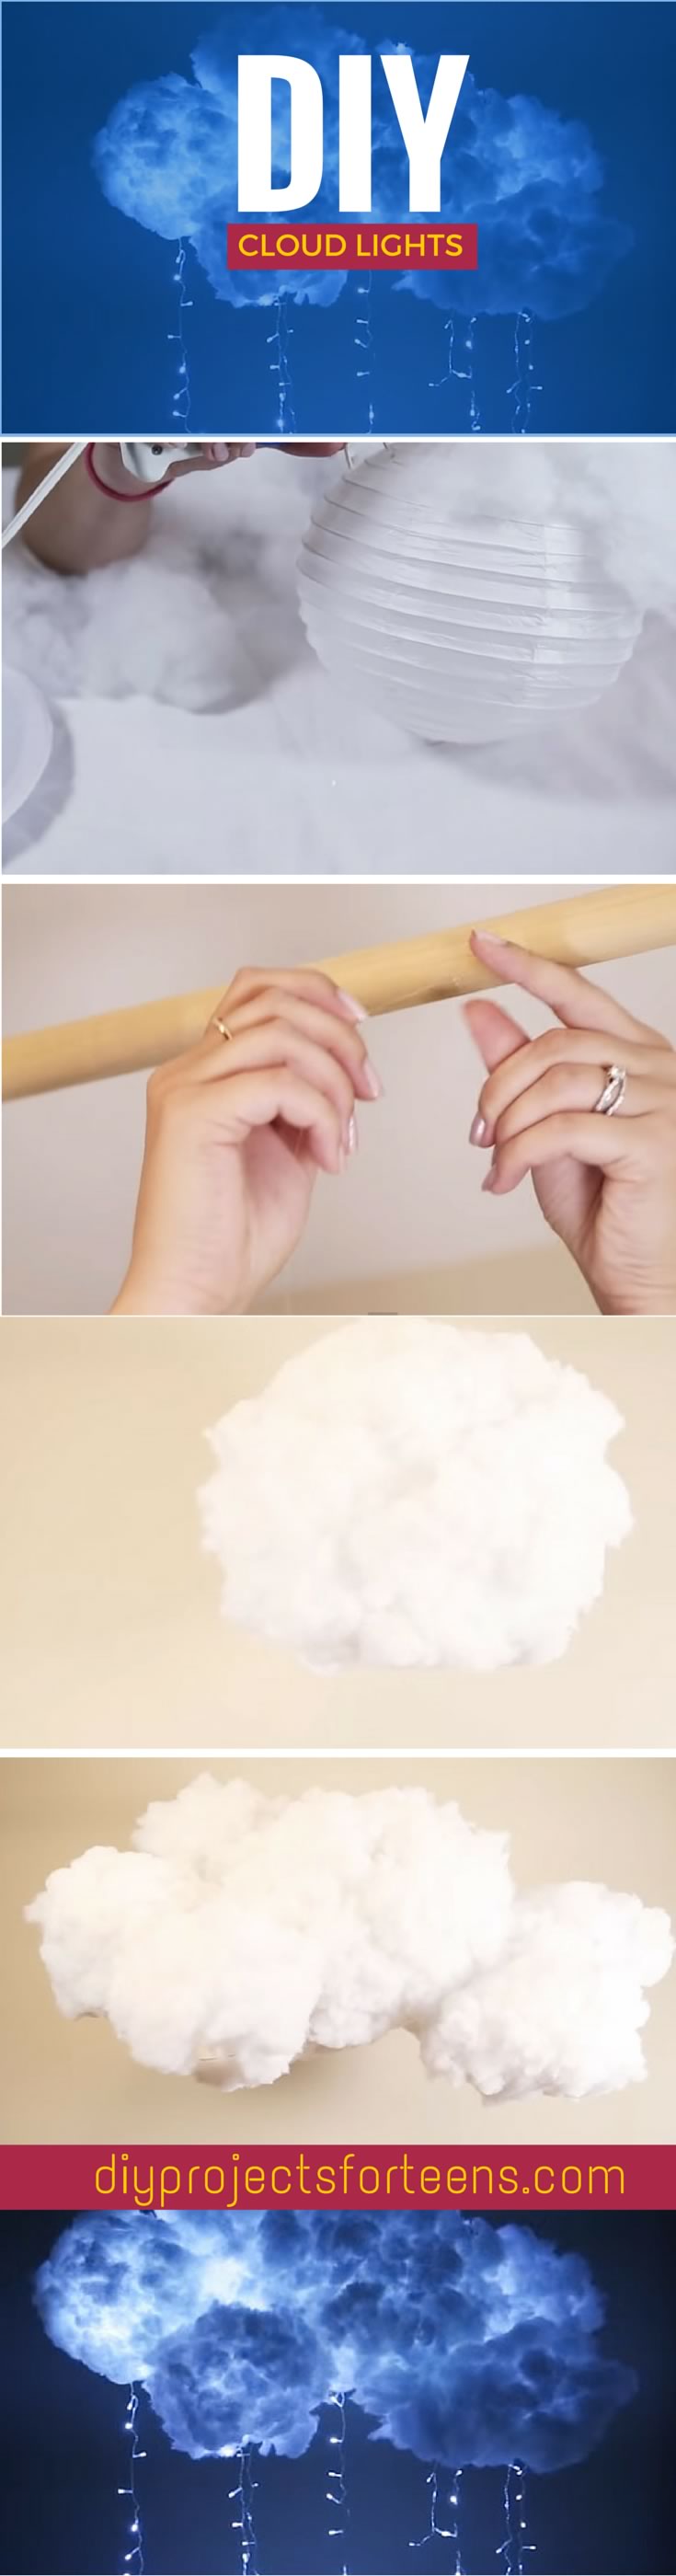 DIY Projects For Teens Room Ideas - Easy DIY Made- Make Clouds With String Lights